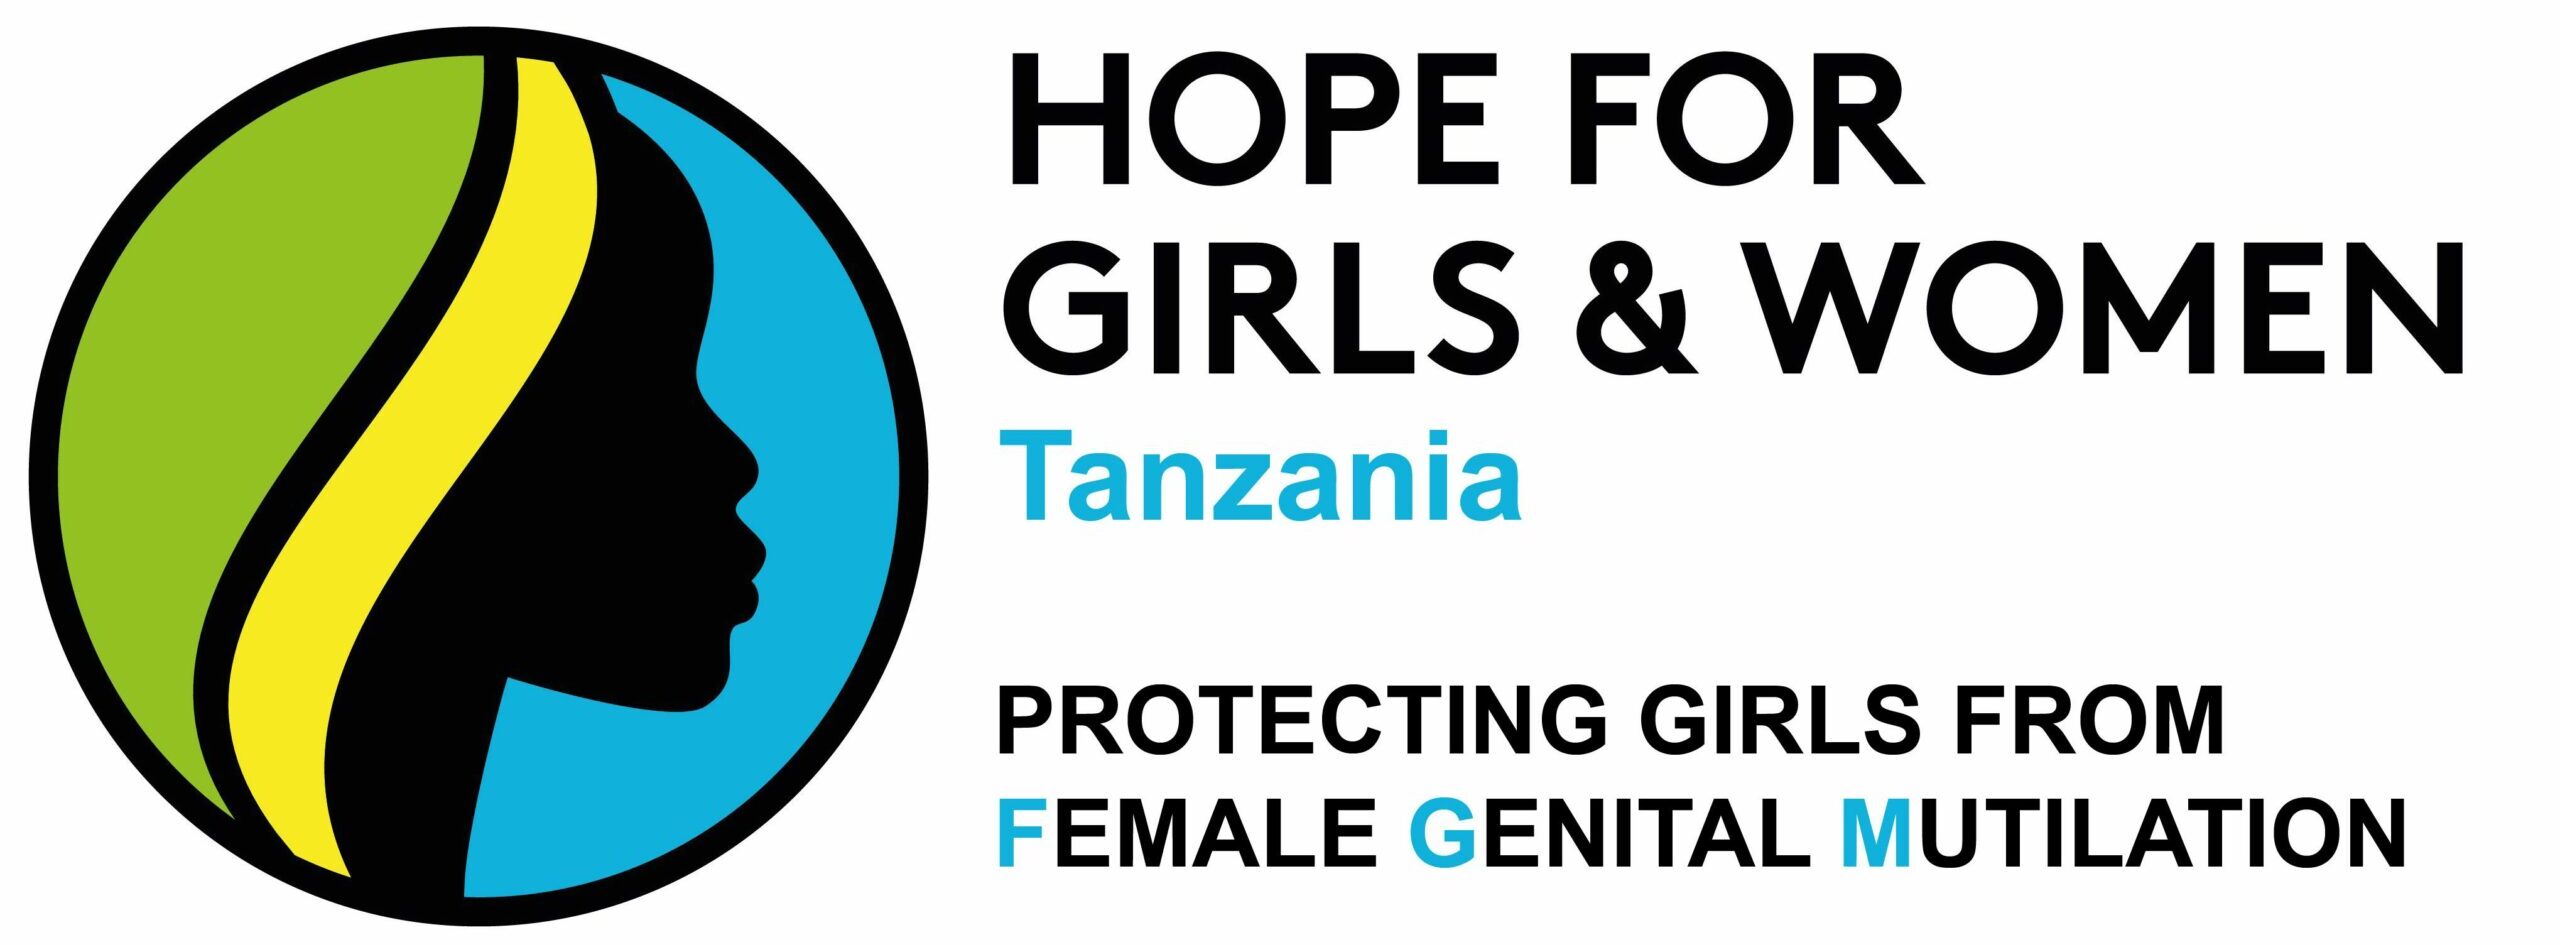 Hope for girls and women